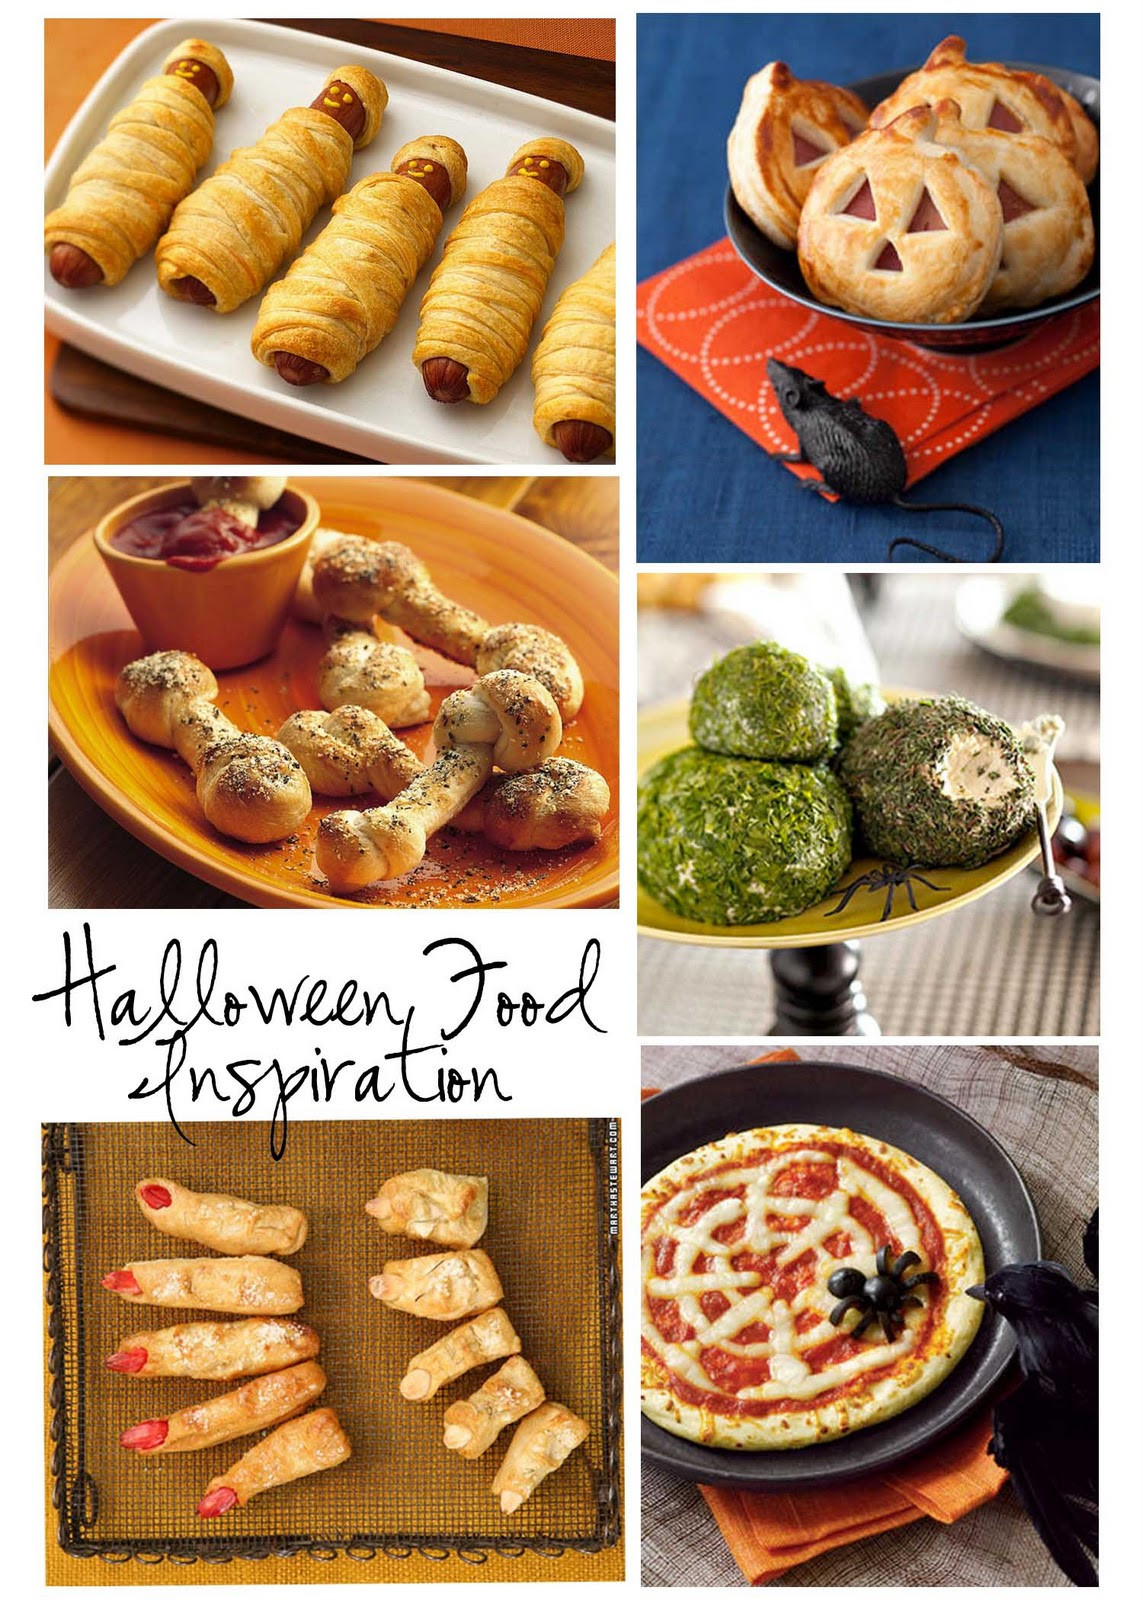 Halloween Food Party Ideas
 Room to Inspire Spooky Food Ideas